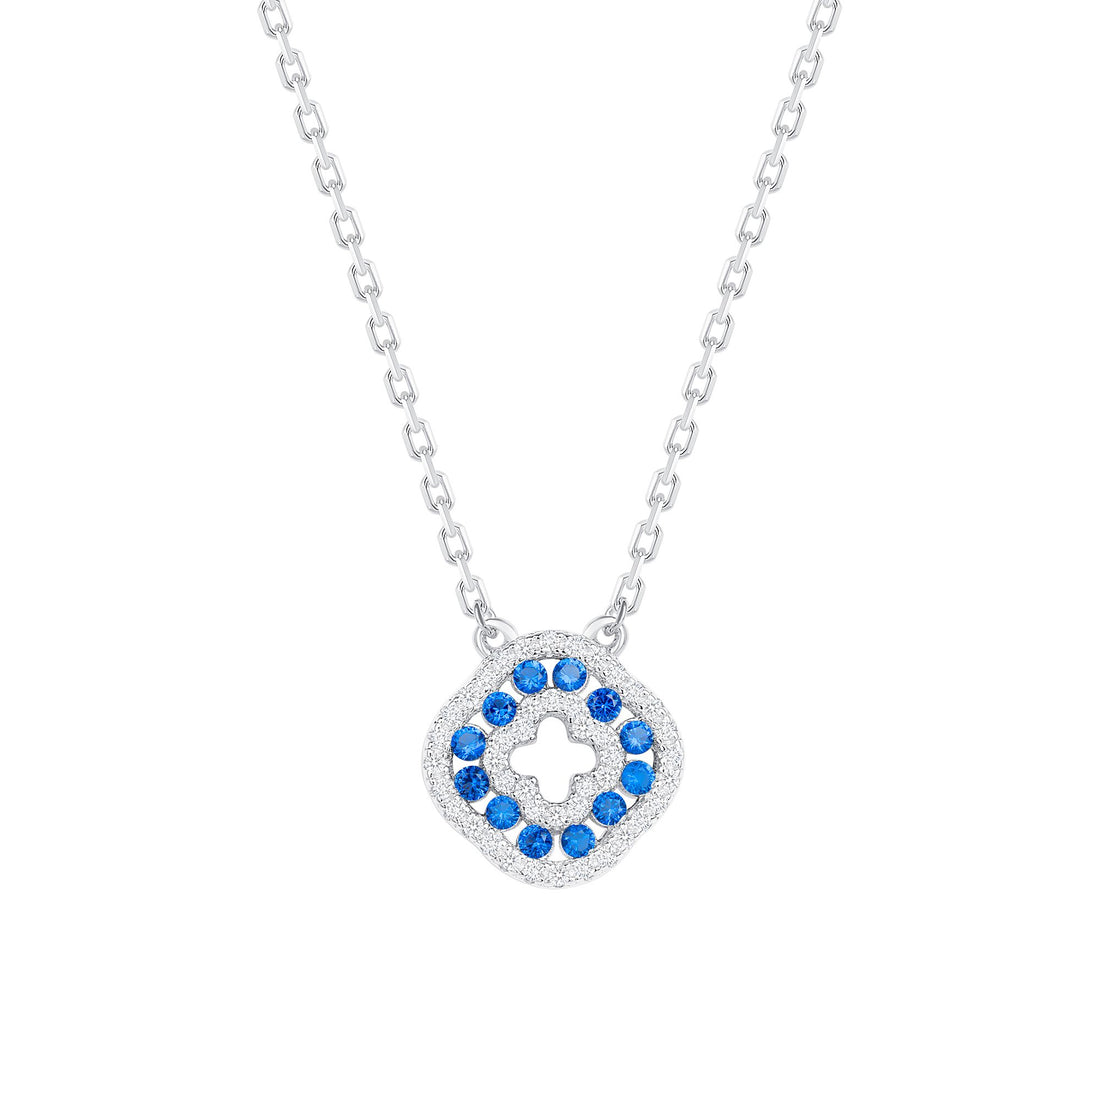 925 Sterling Silver Round Cut Blue &amp; White CZ Alternating Rows Square Clover Pendant &amp; Stud Earrings Jewelry Set